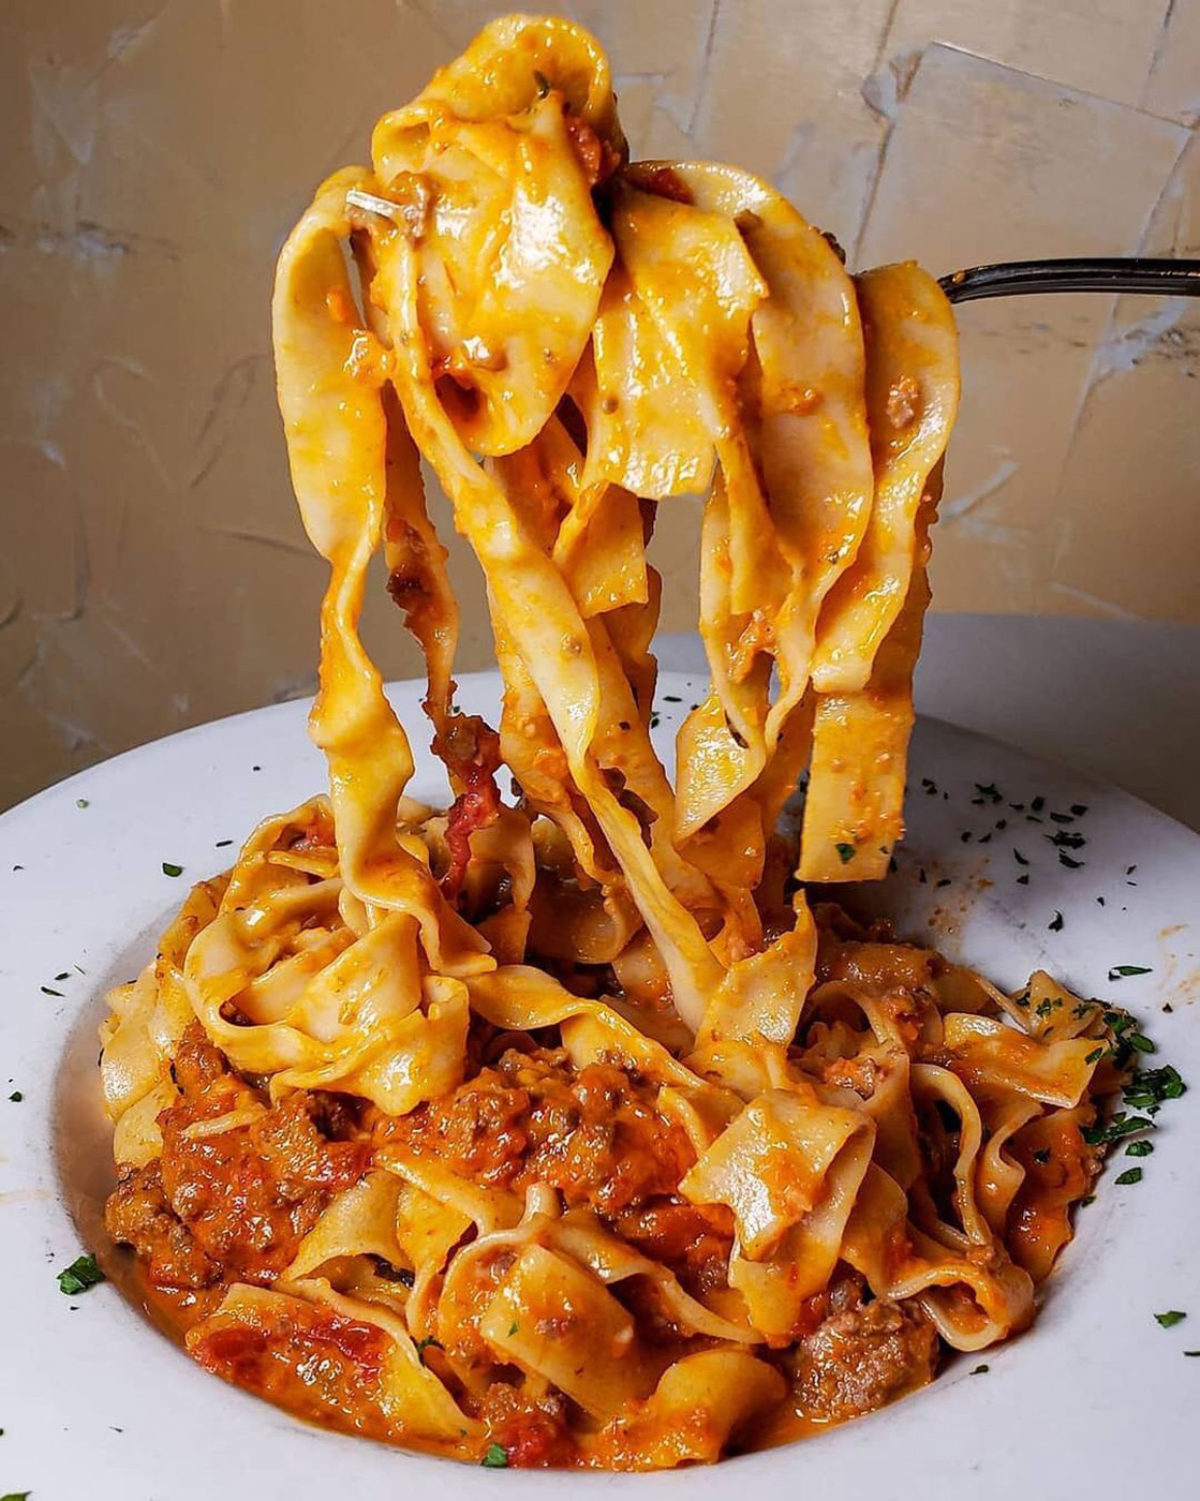 Pasta with Bolognese sauce.